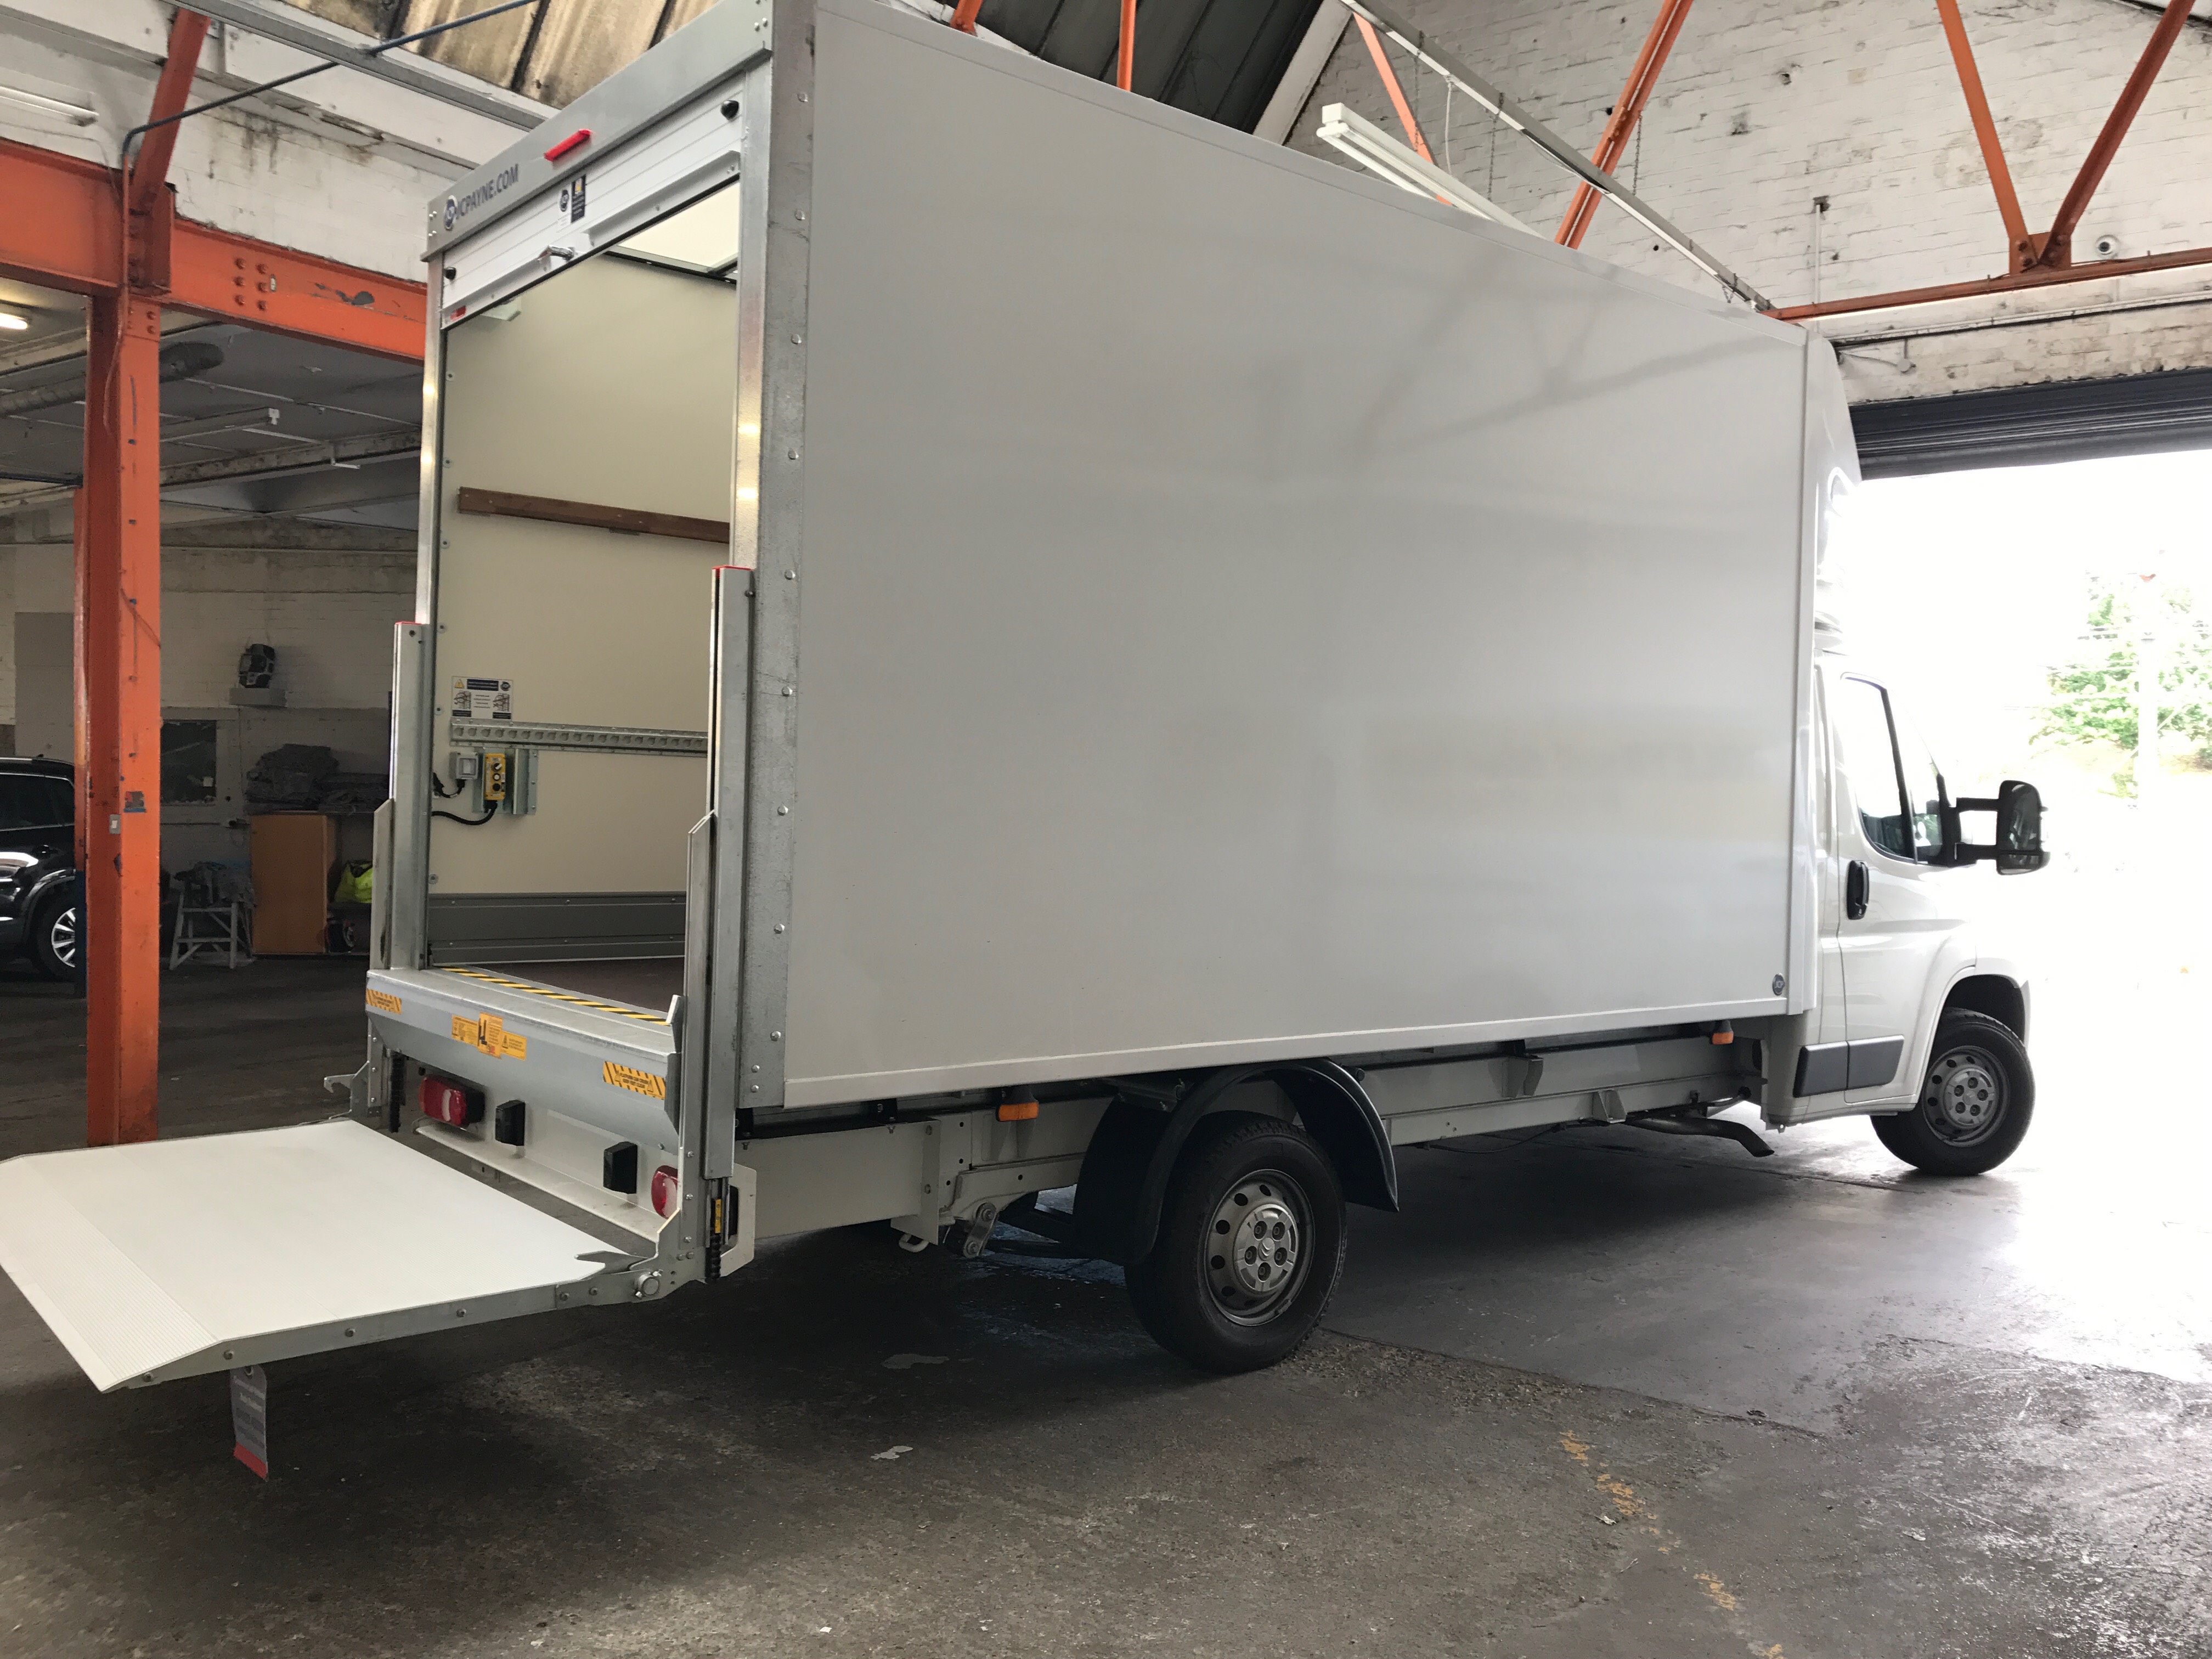 Citroen Relay Luton Box With Tail Lift For Hire In E3 E4